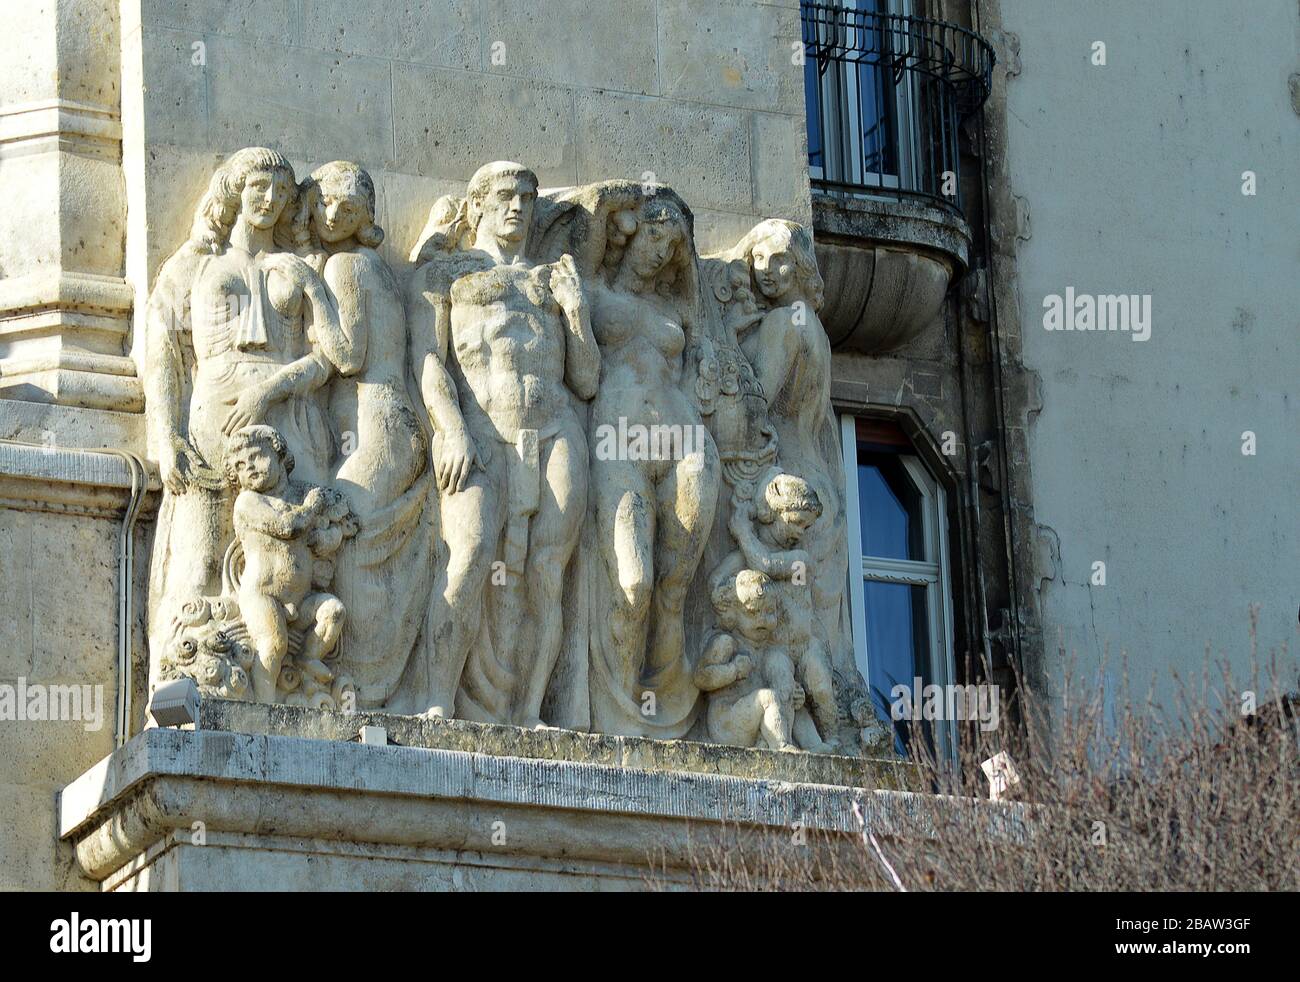 BUDAPEST, HUNGARY - 9 FEBRUARY 2020: Art nouveau sculpture atop the Hotel Gellert, a famous hotel on the Gellert Hill by the River Danube Stock Photo